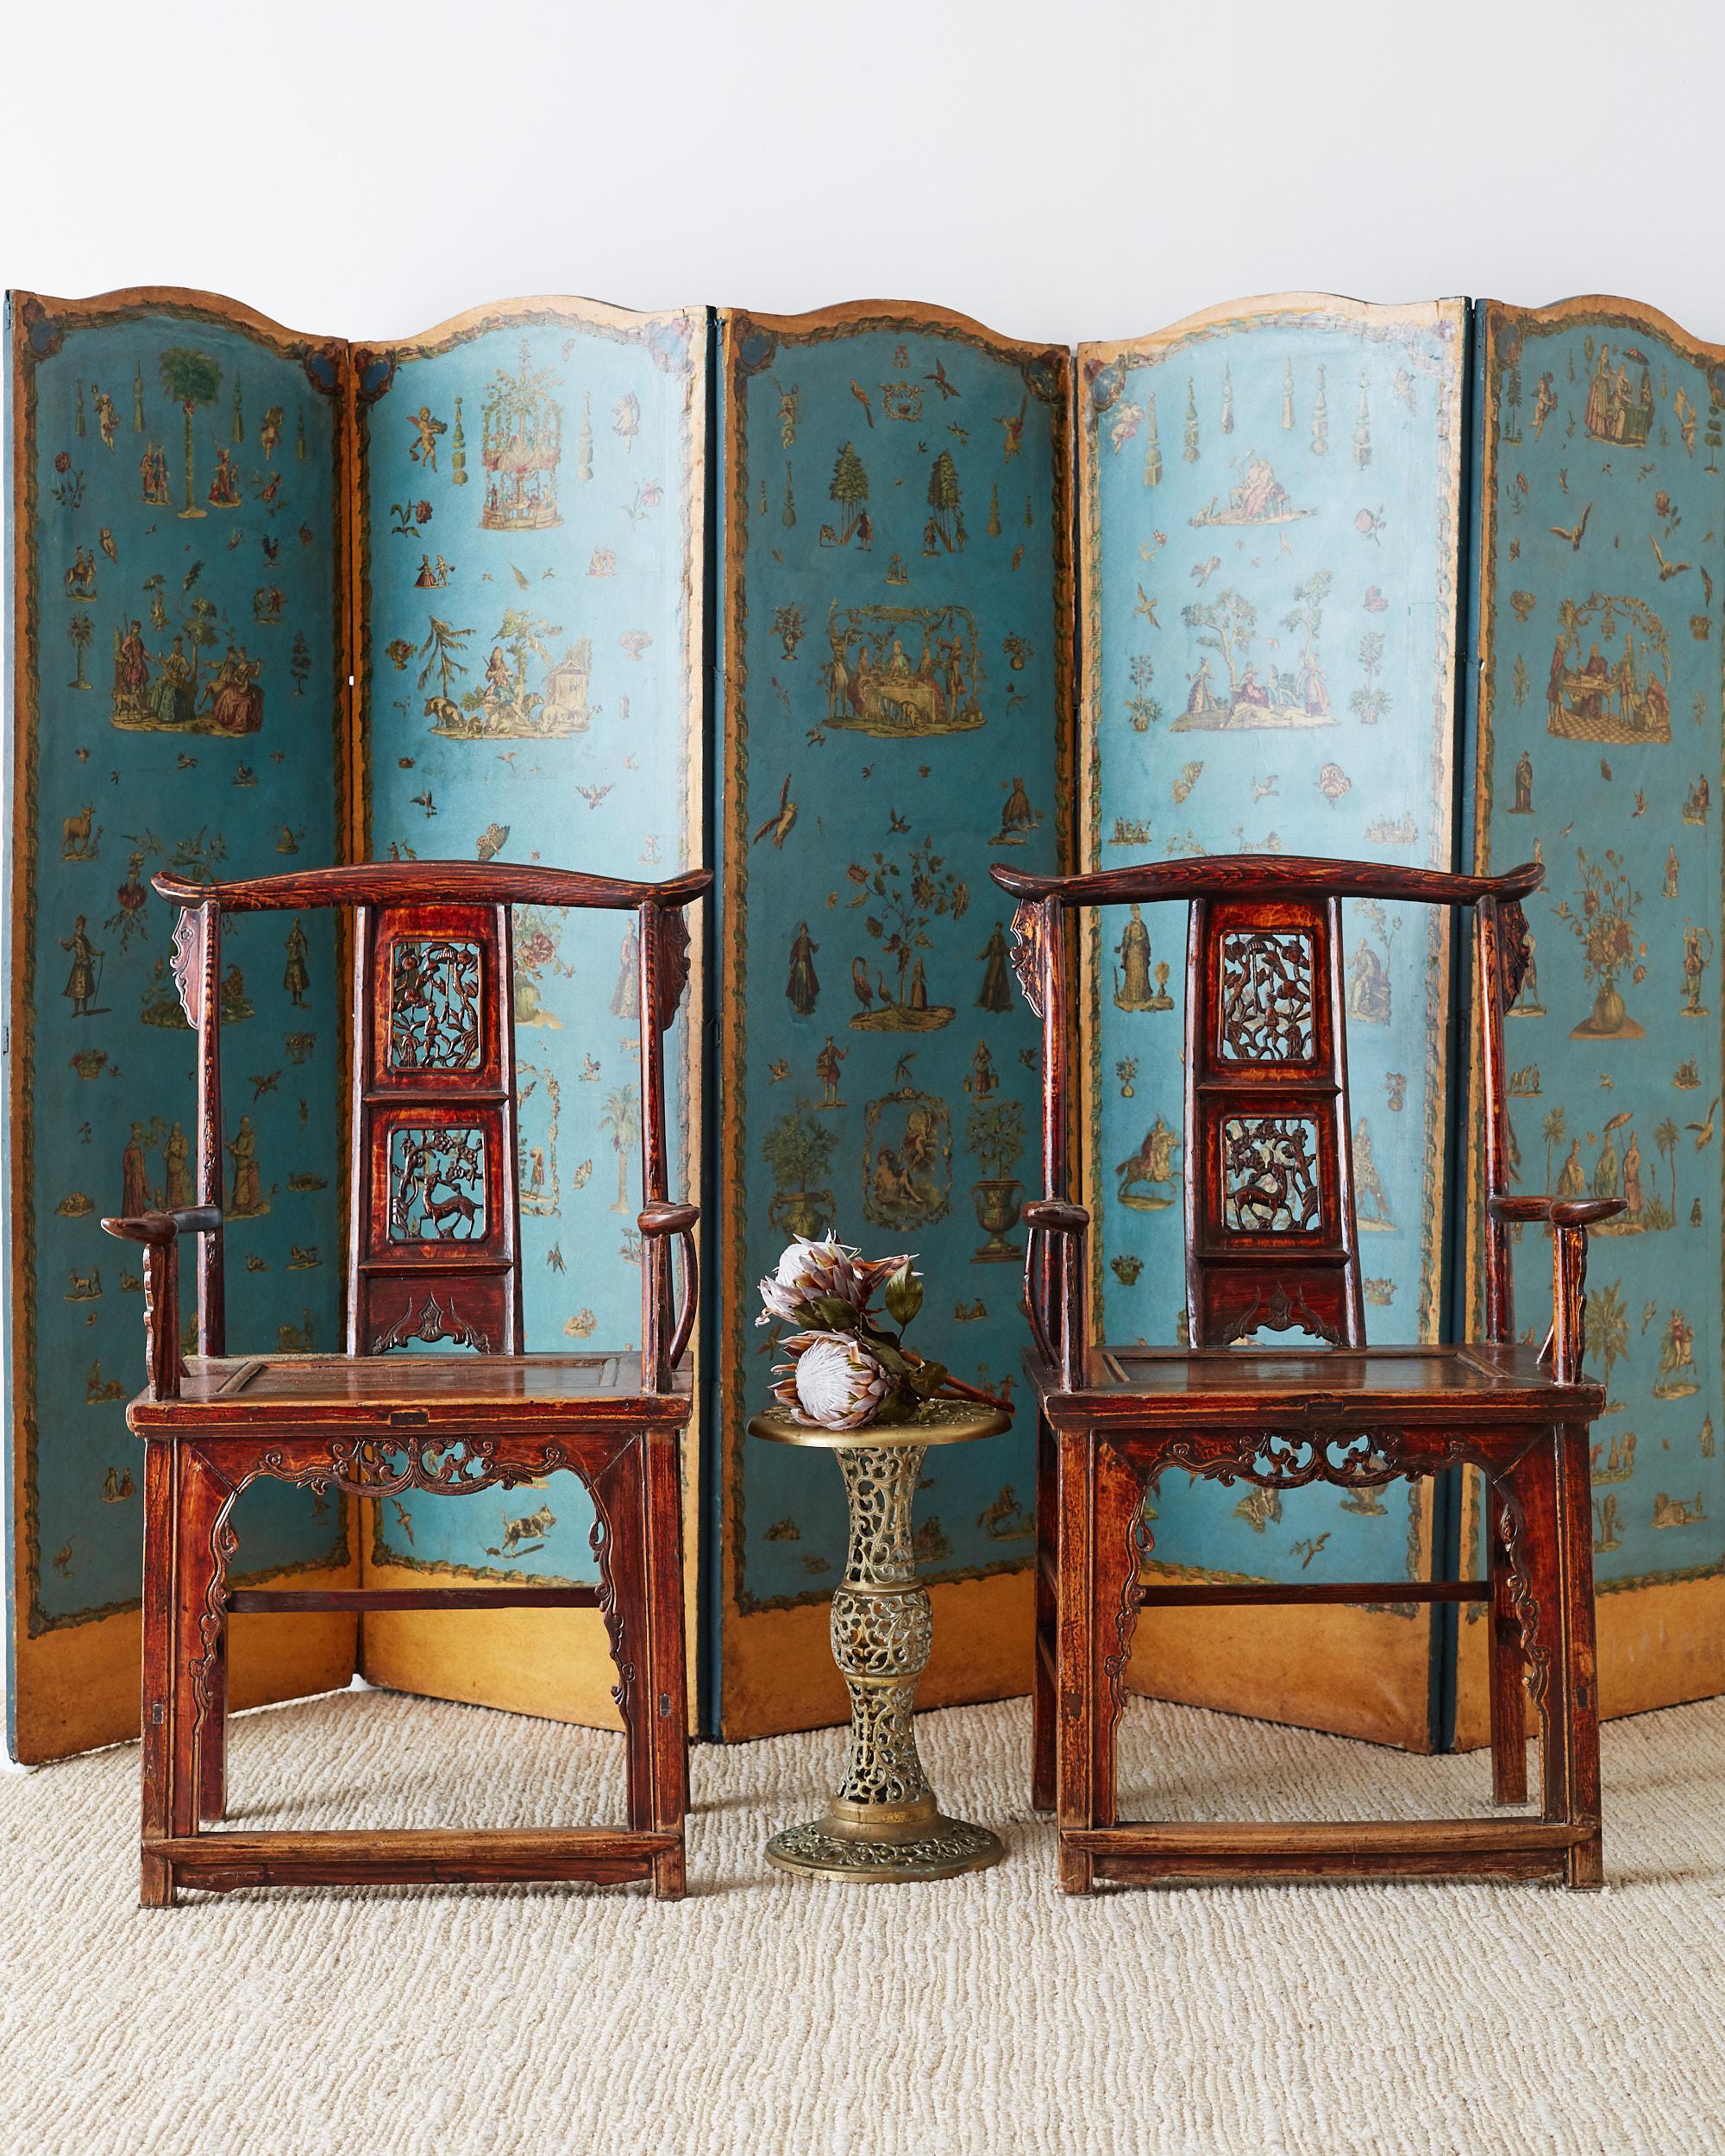 Highly carved pair of Chinese elm yoke back officials hat chairs. Featuring a decorative back splat with figural scenes. The arms have a whimsical serpentine form and the spandrels on the crest and front apron have finely carved detail. Constructed